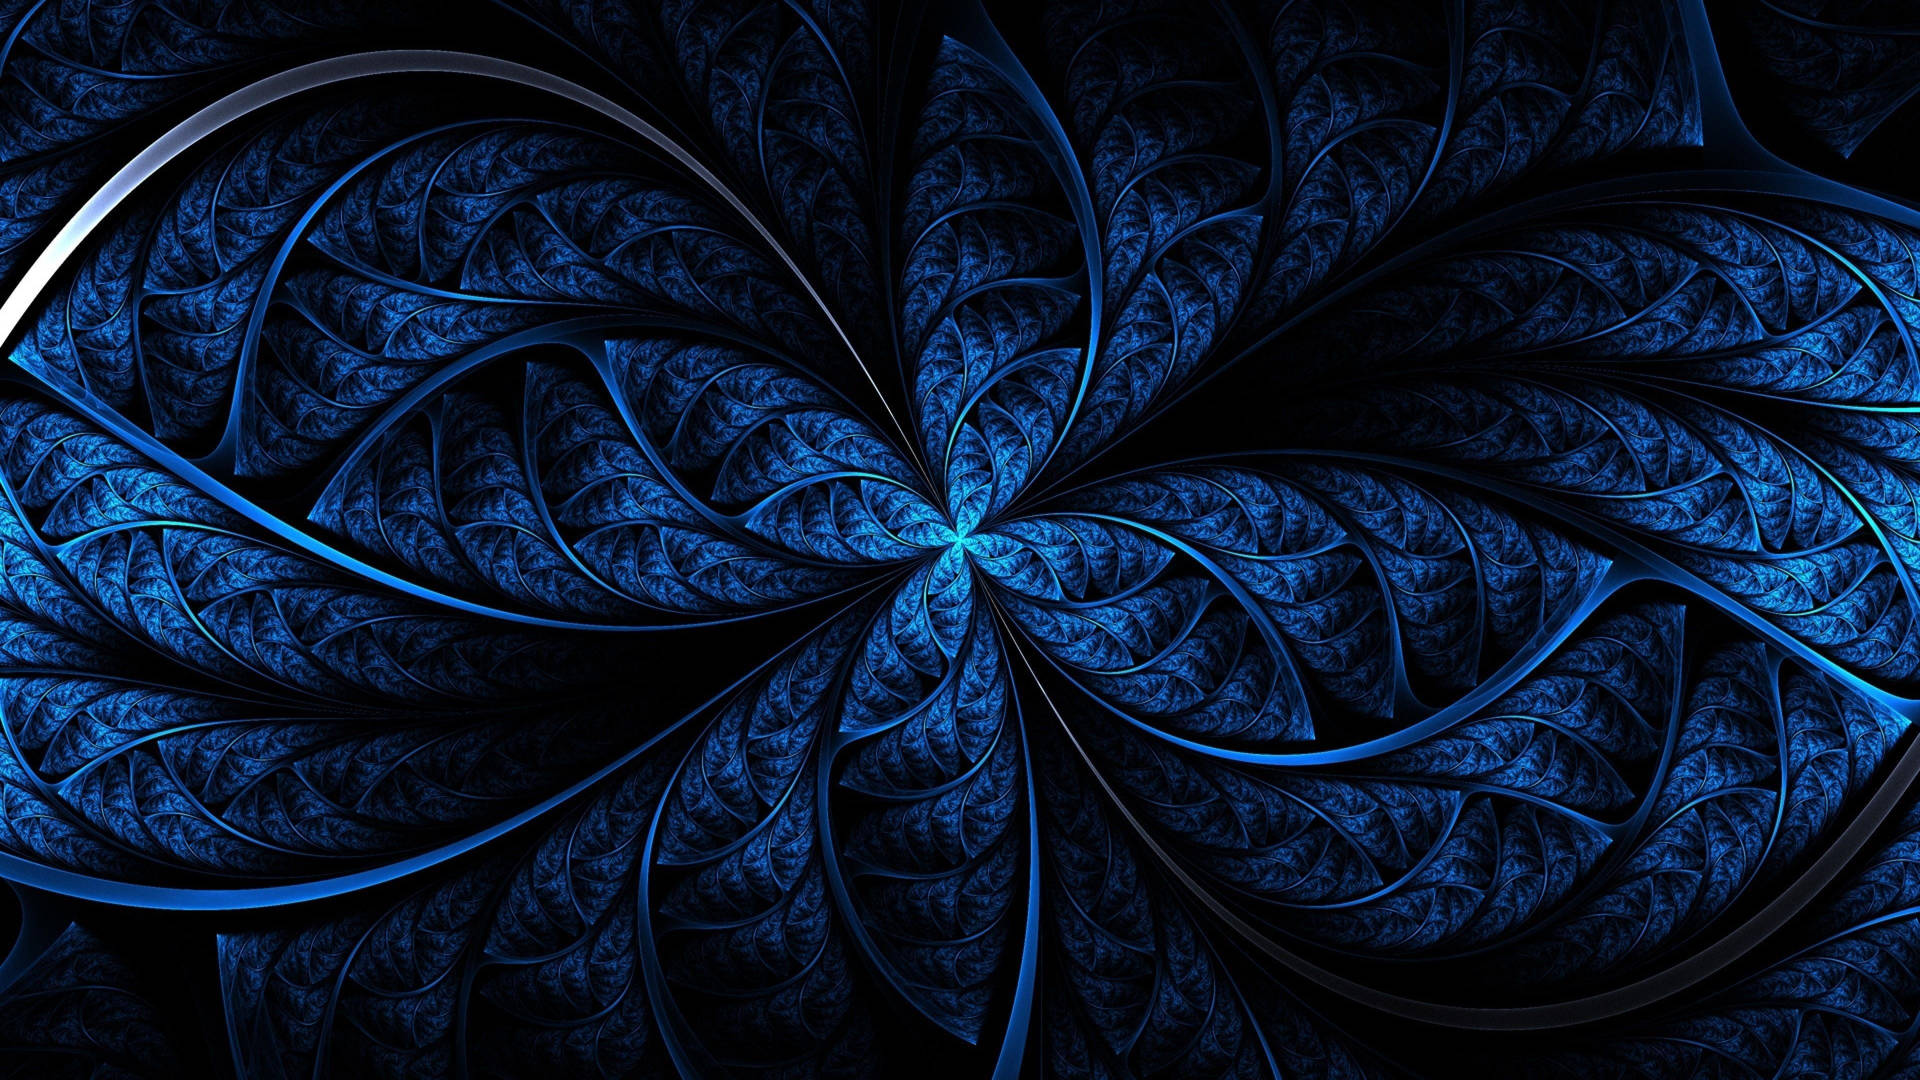 Leaf-like Abstract Dark And Blue Aesthetic Laptop Wallpaper